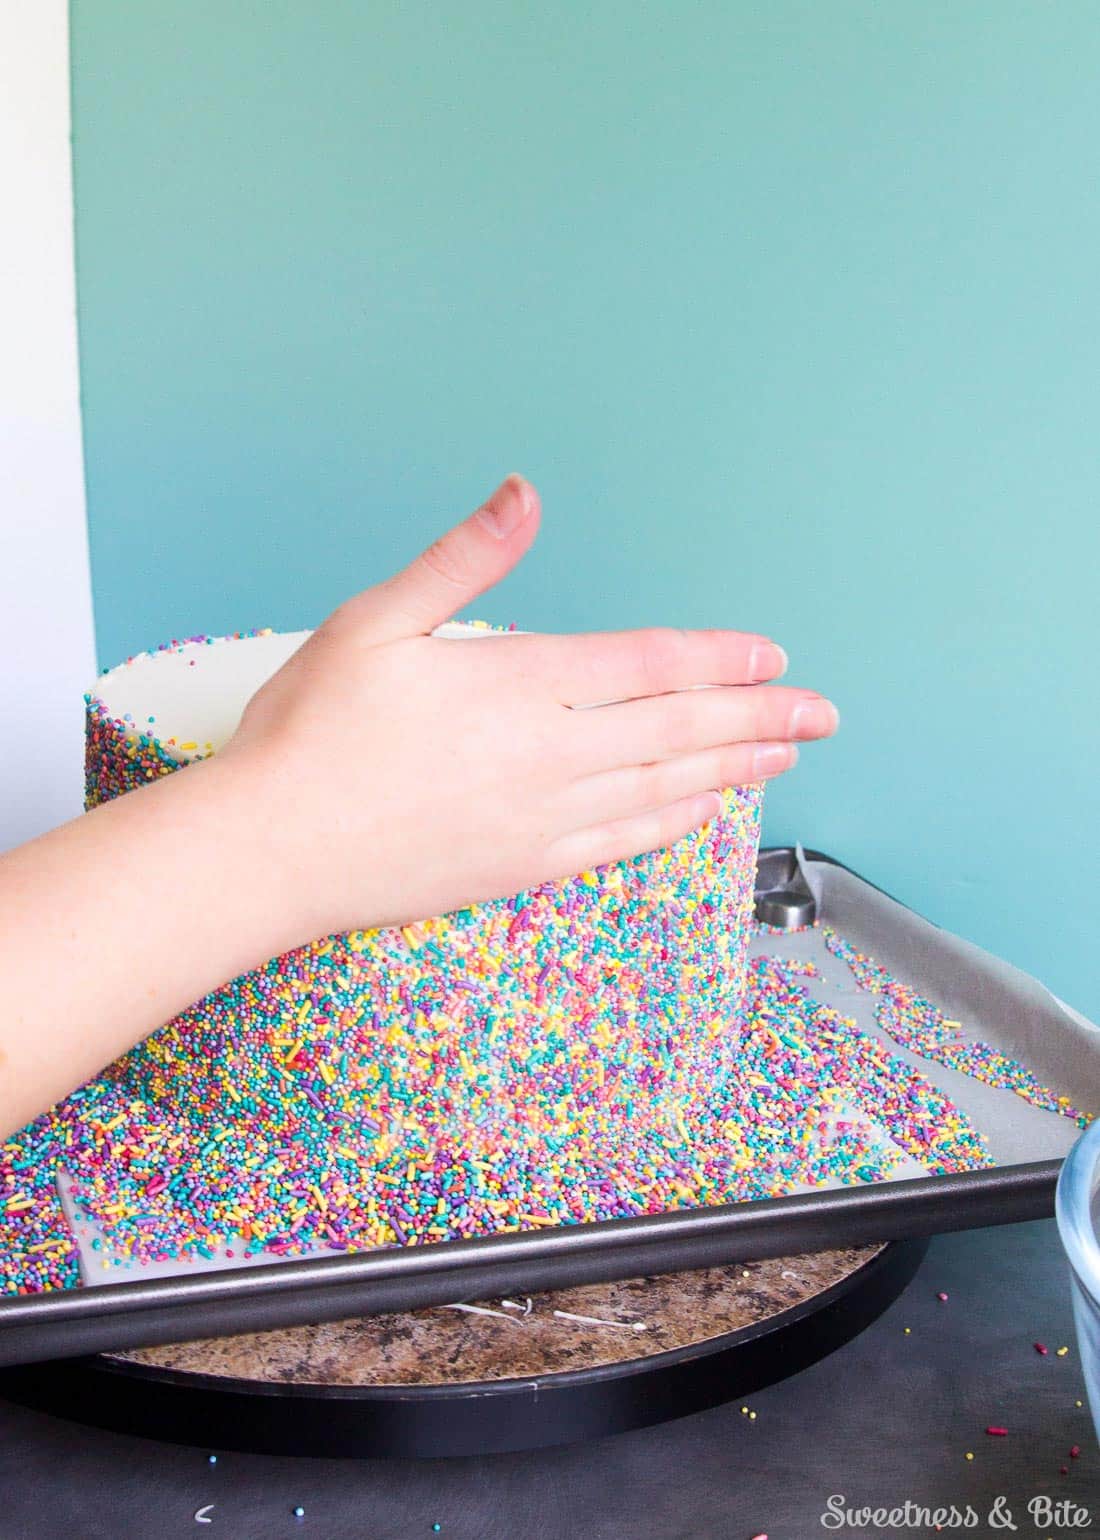 Sprinkle Cake Tutorial - A step by step guide to applying sprinkles to a fondant covered cake ~ Sweetness and Bite